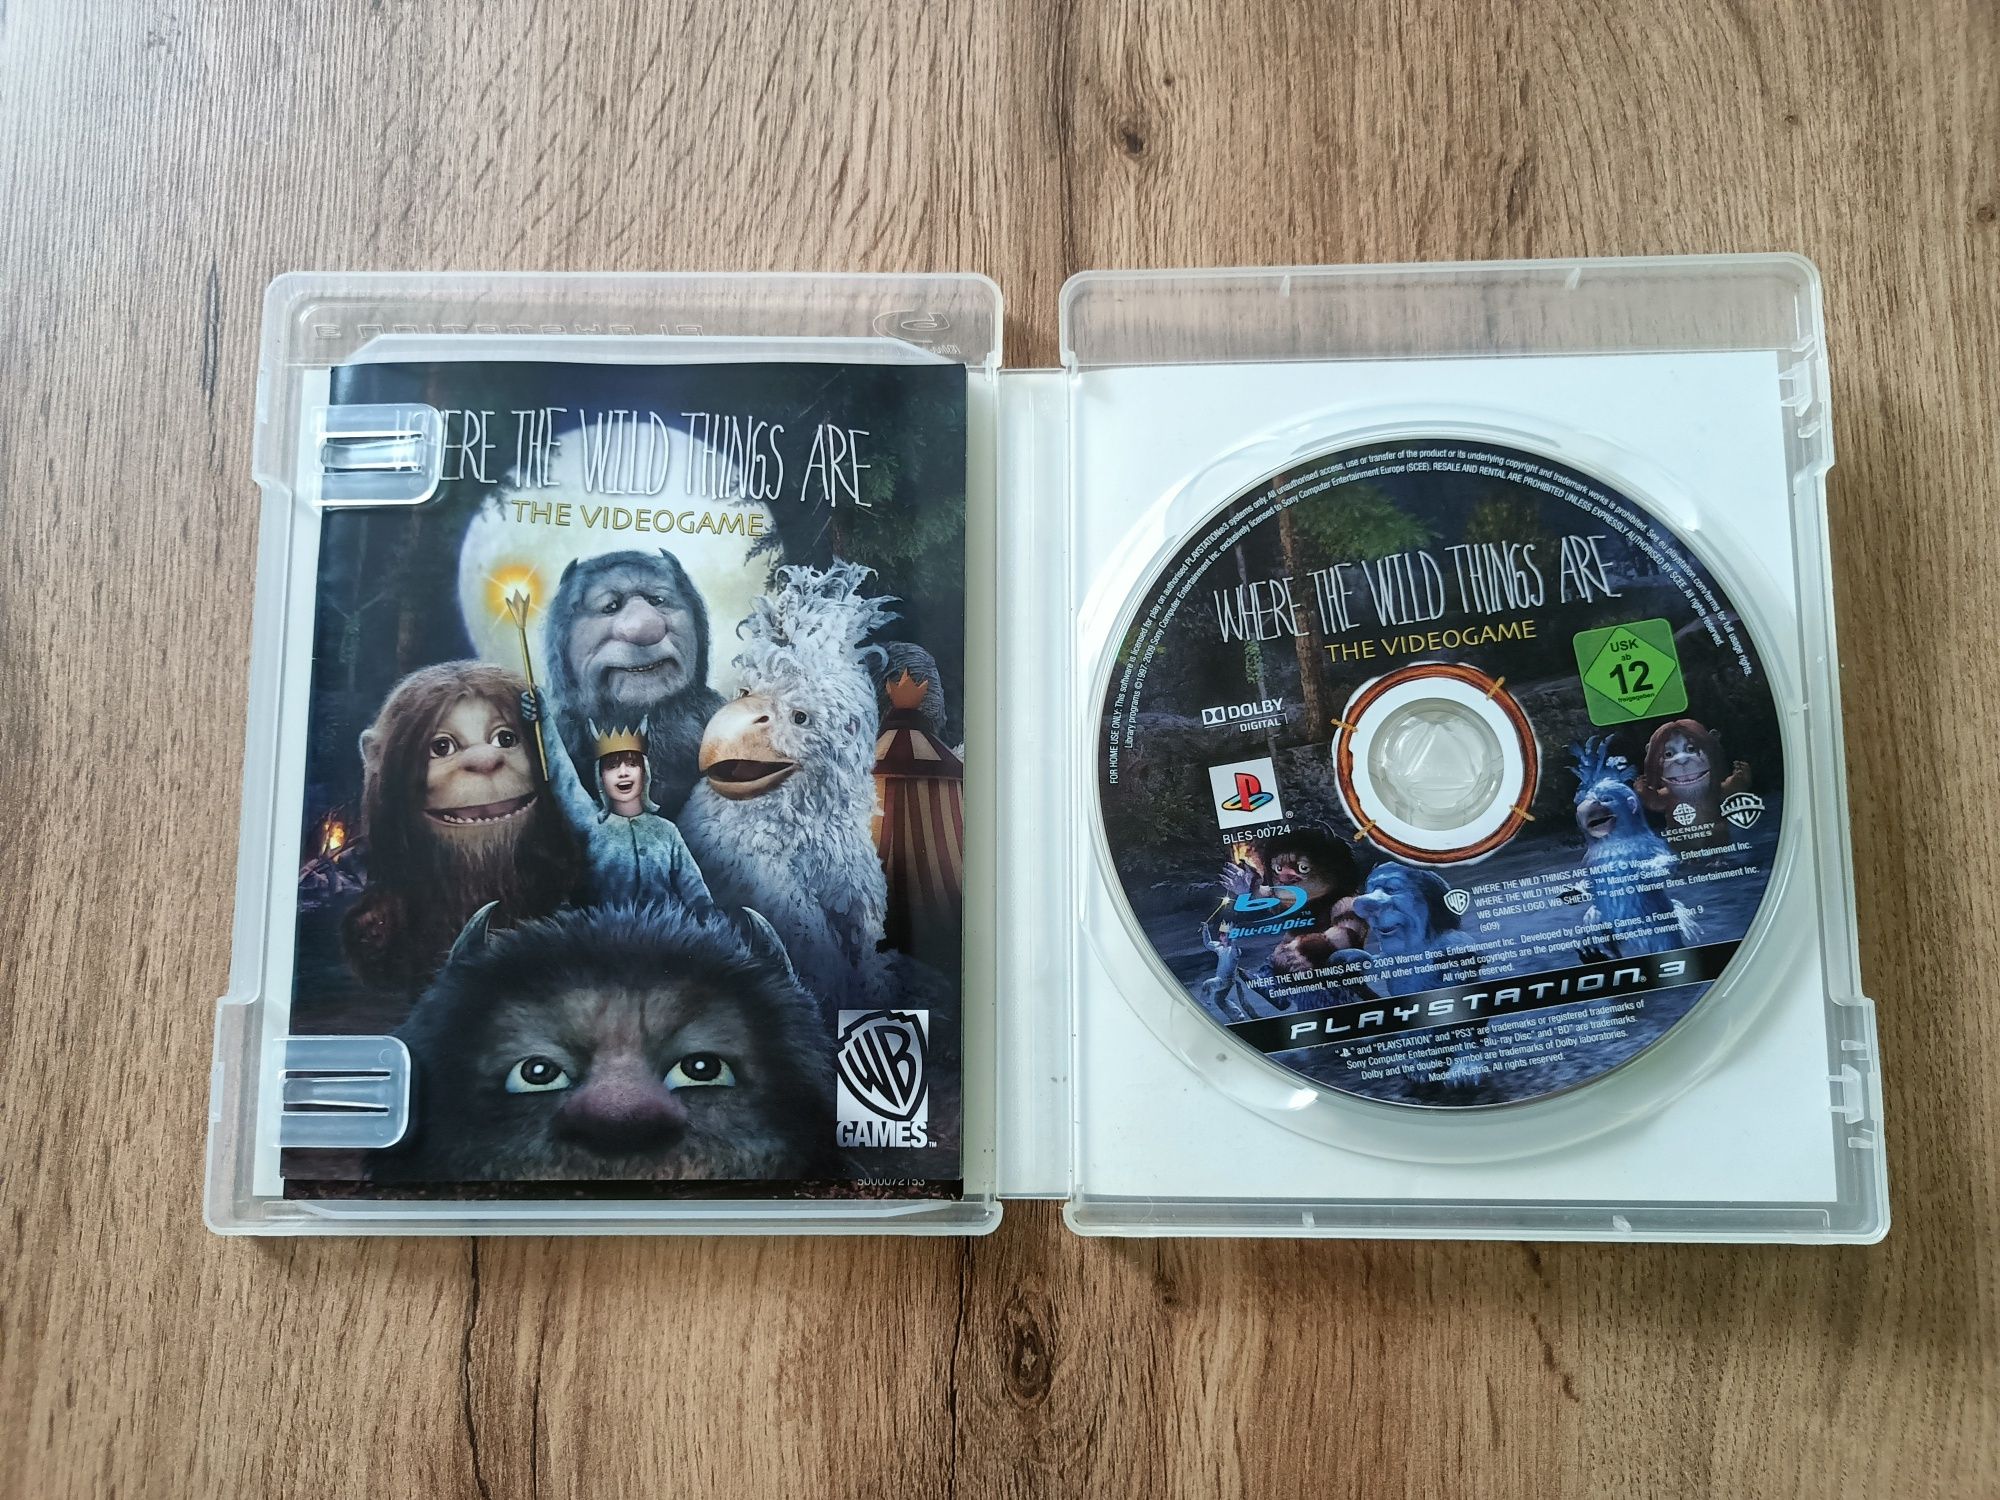 Where The Wild Things Are The Videogame PS3